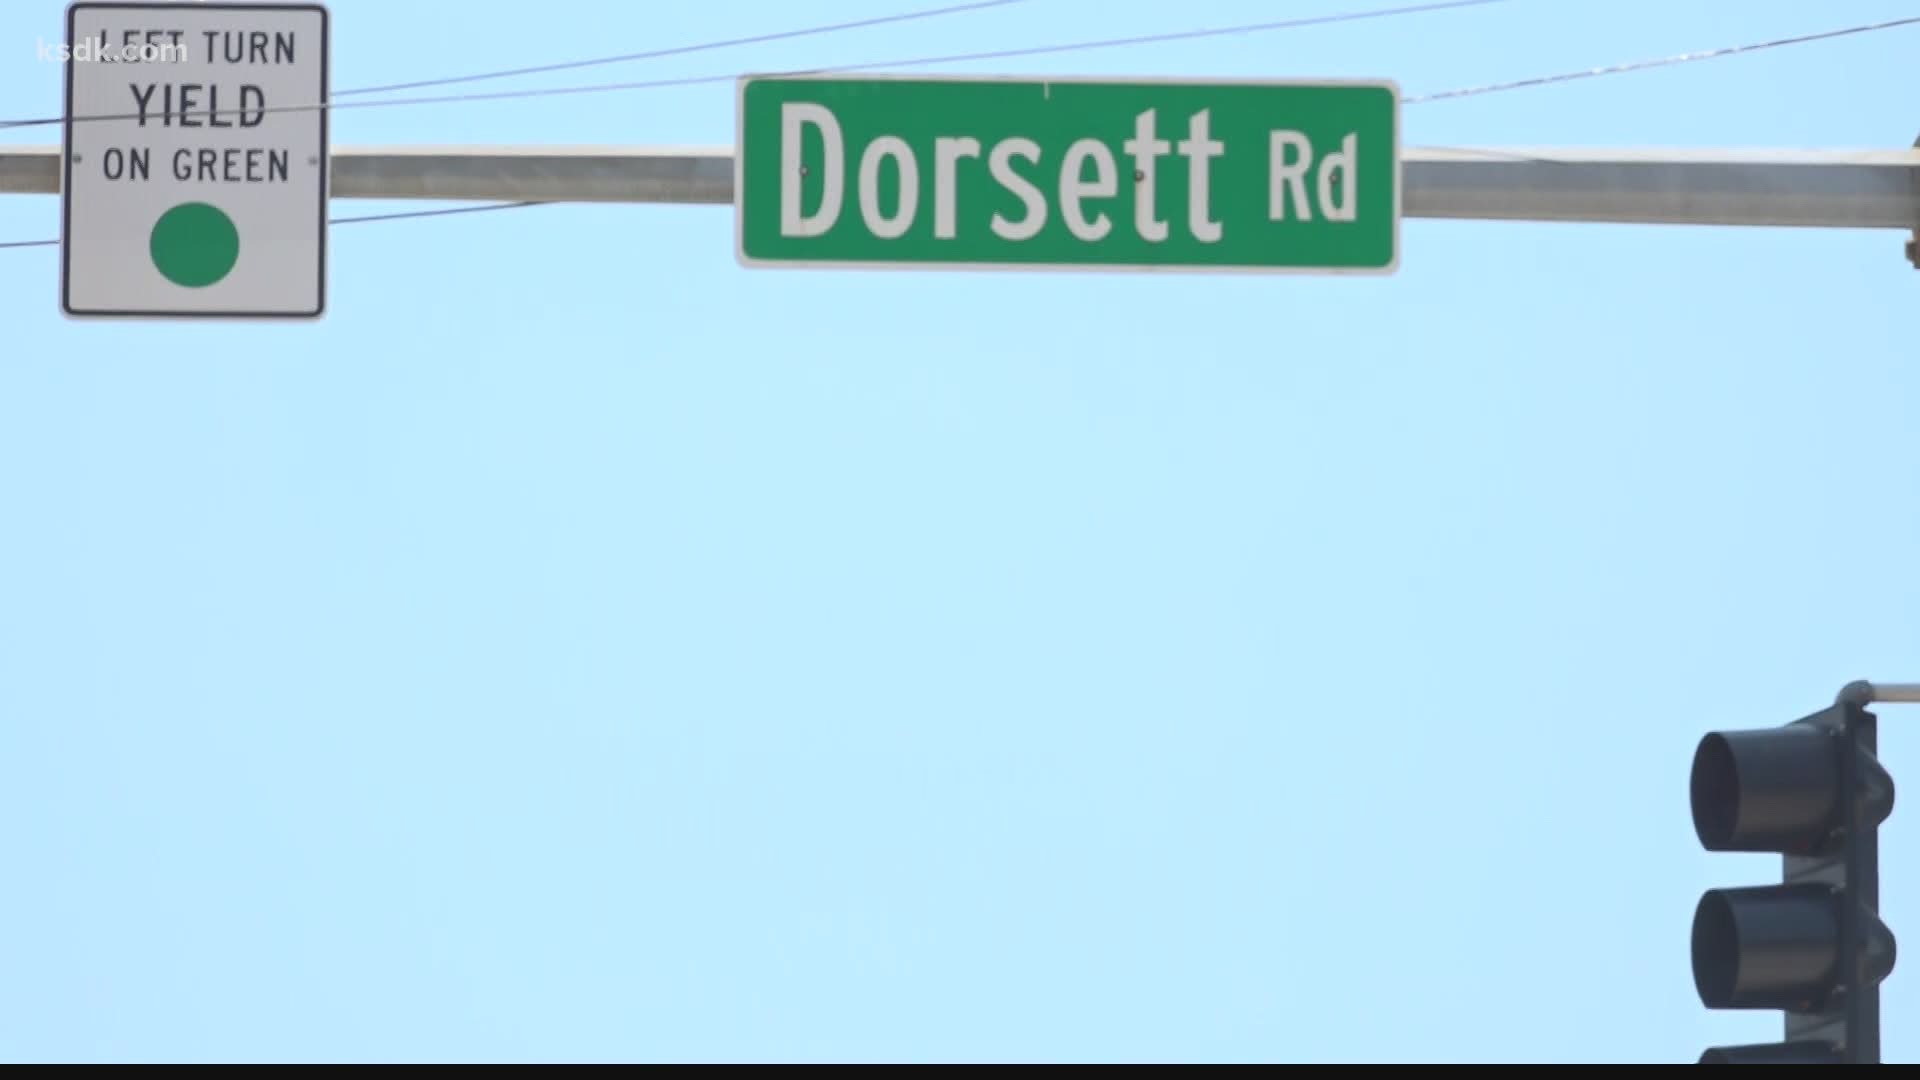 The St. Louis County Council would have to vote to rename the road and come up with a new name